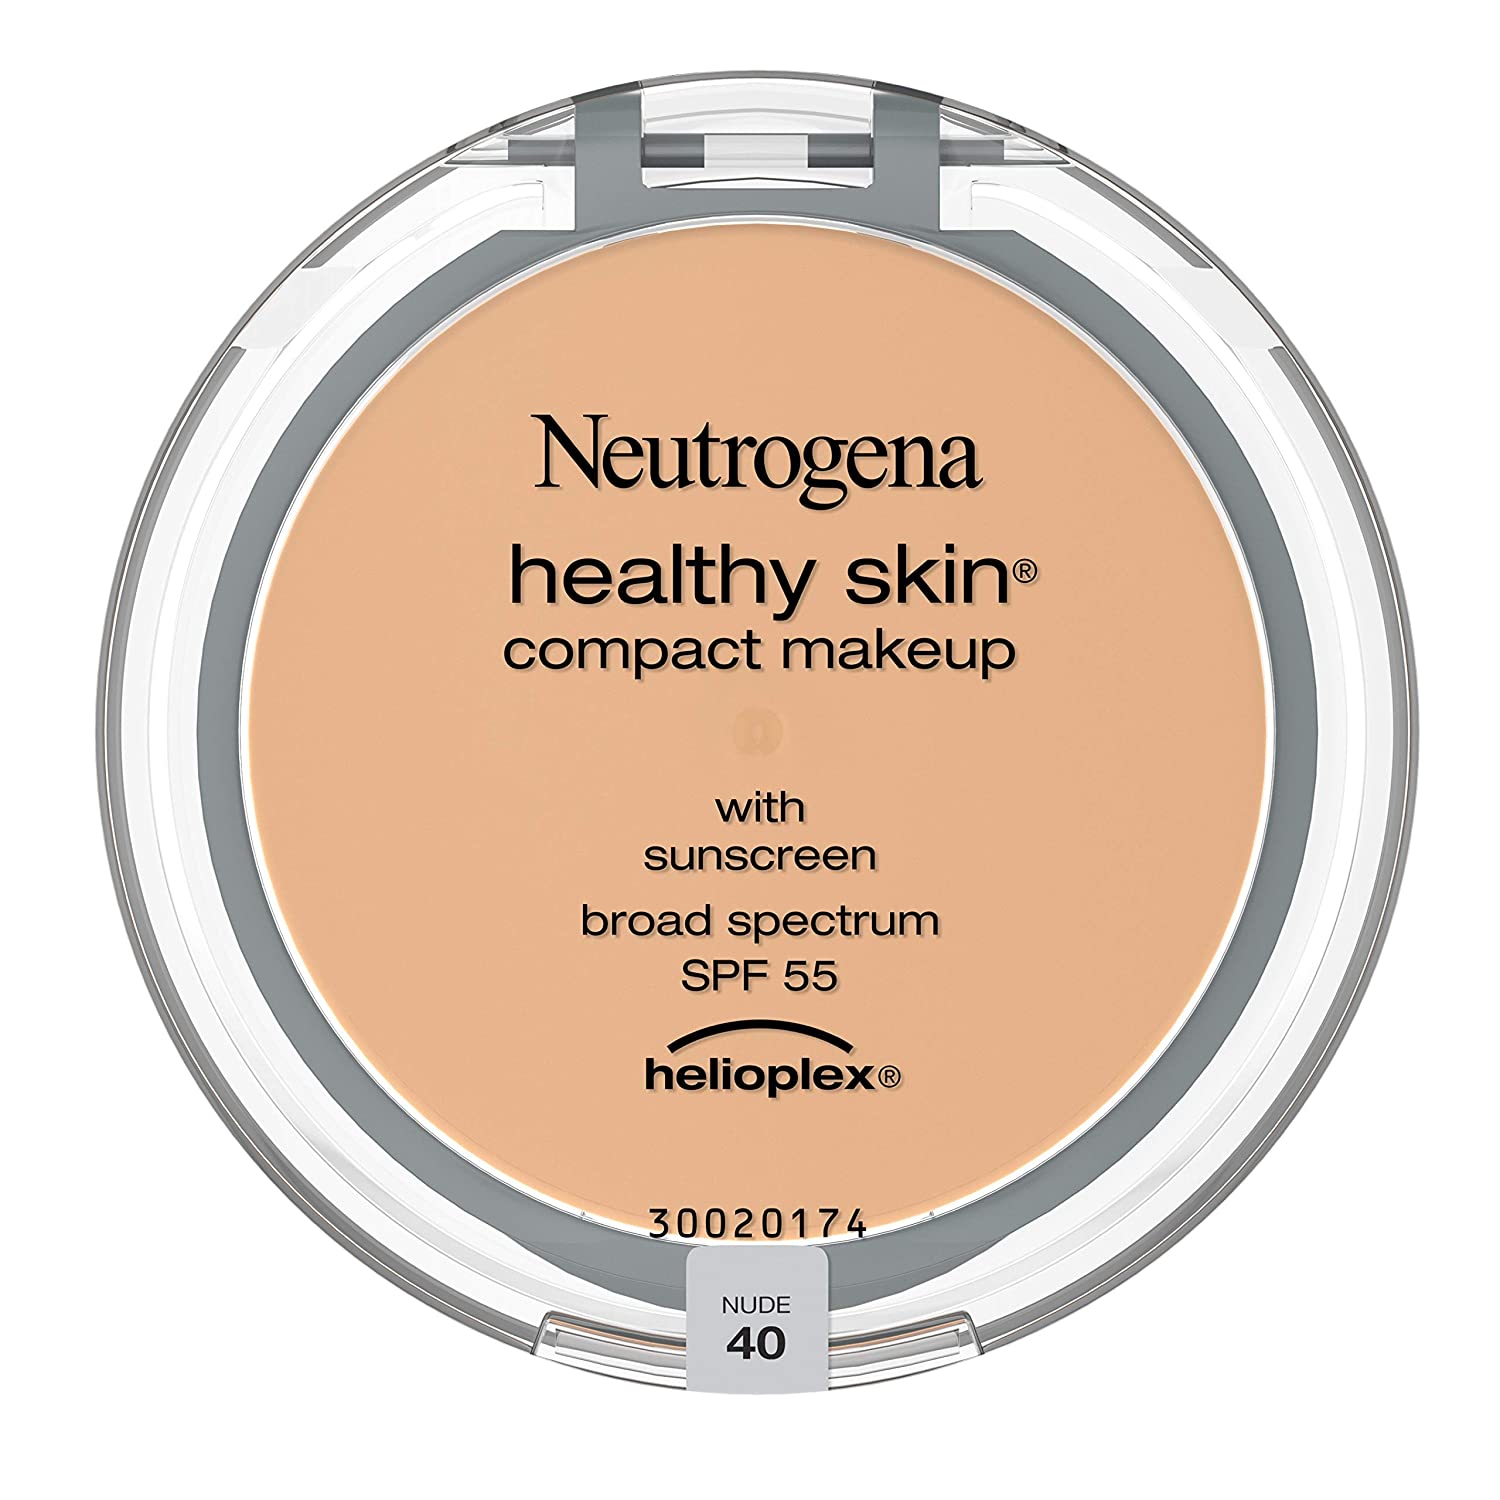 Neutrogena Healthy Skin Compact Lightweight Cream Foundation Makeup with Vitamin E Antioxidants, Non-Greasy Foundation with Broad Spectrum SPF 55